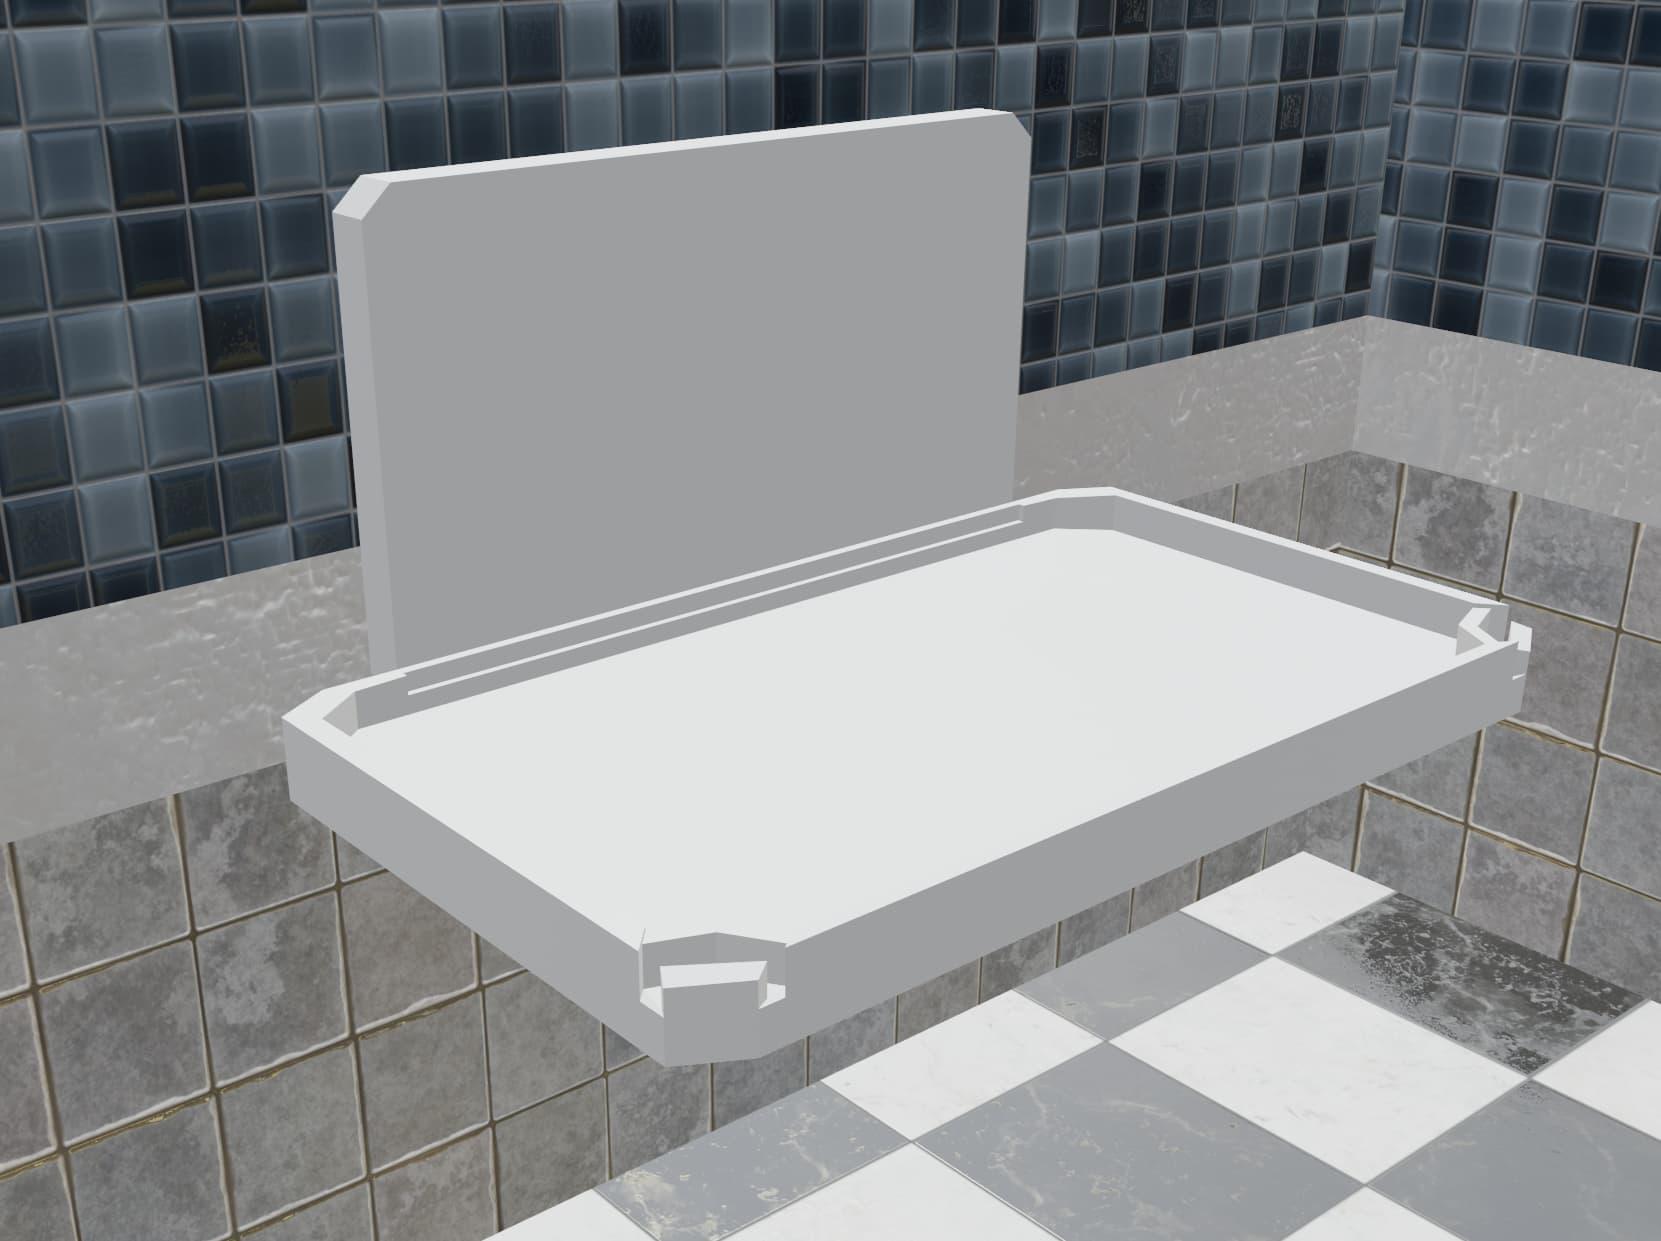 A 3D model of a white baby changing table, with the foldable table part extended